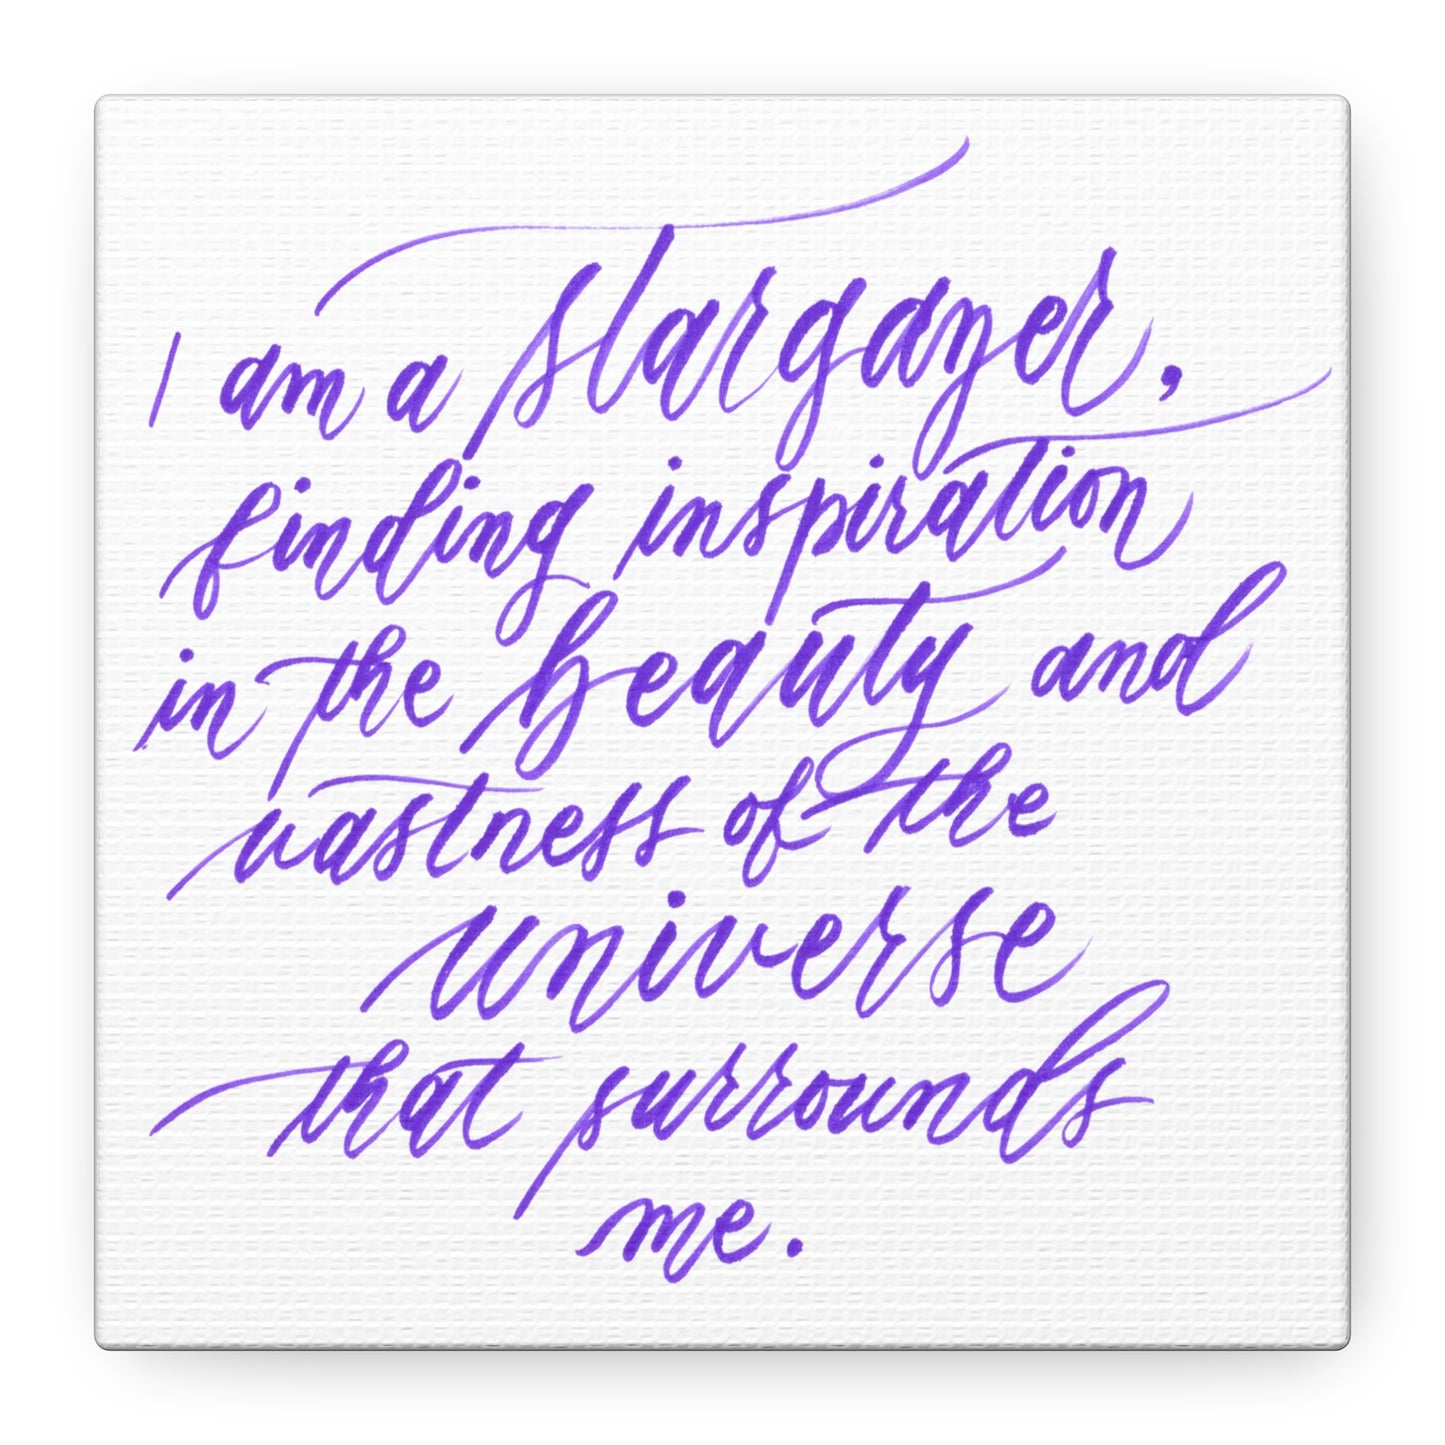 Mini 6"x6" Thick 1.25" Wall Decor Canvas - "I am a stargazer..." Handwritten Calligraphy Printed on Matte Canvas, Stretched, 1.25" - I am Empowered #05